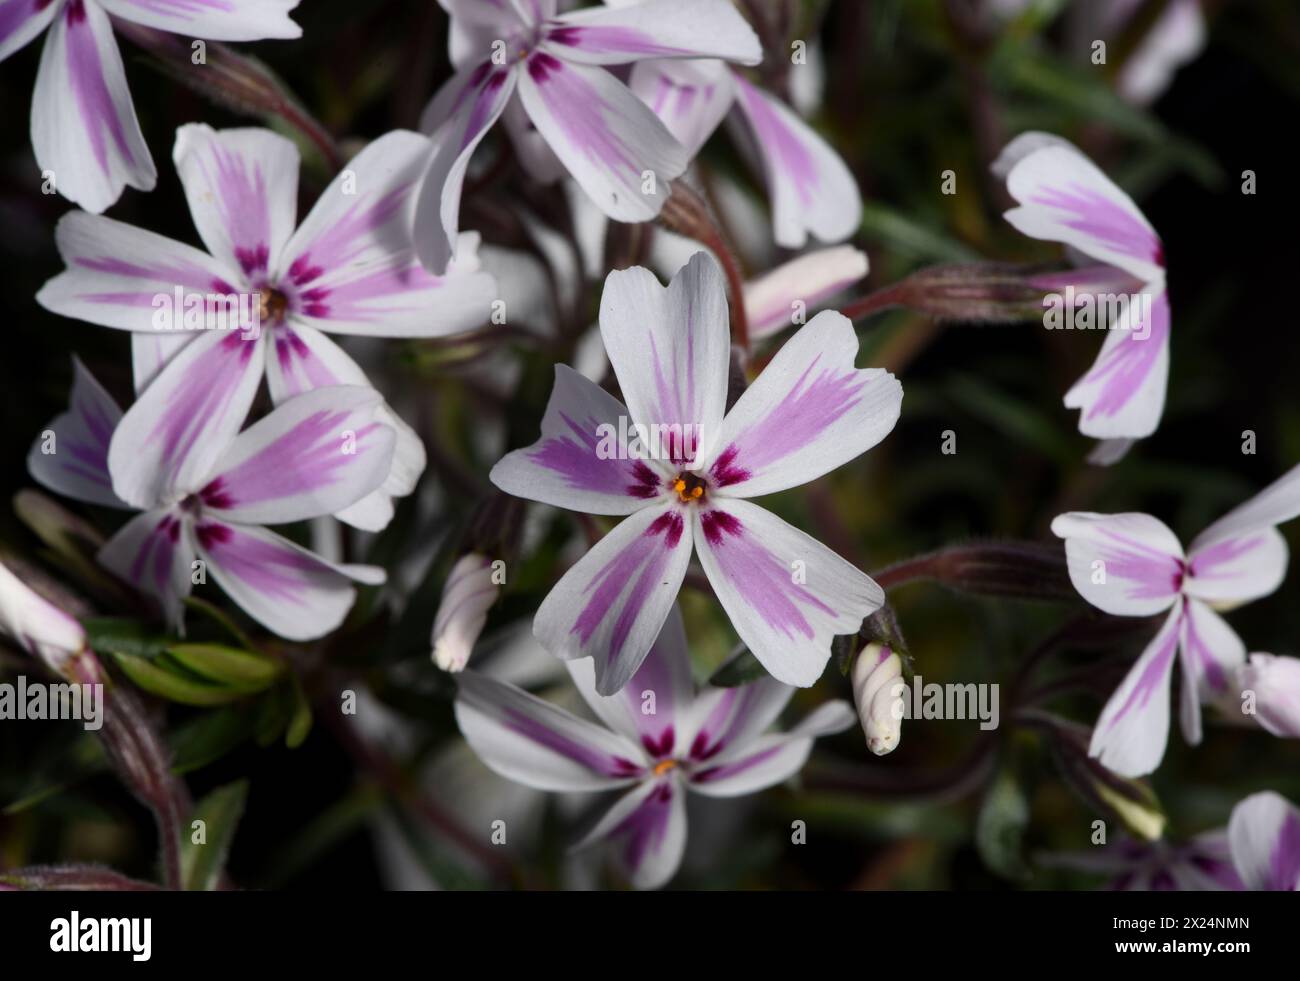 The blossoms of a Candy Stripe creeping phlox perennial flower Stock Photo